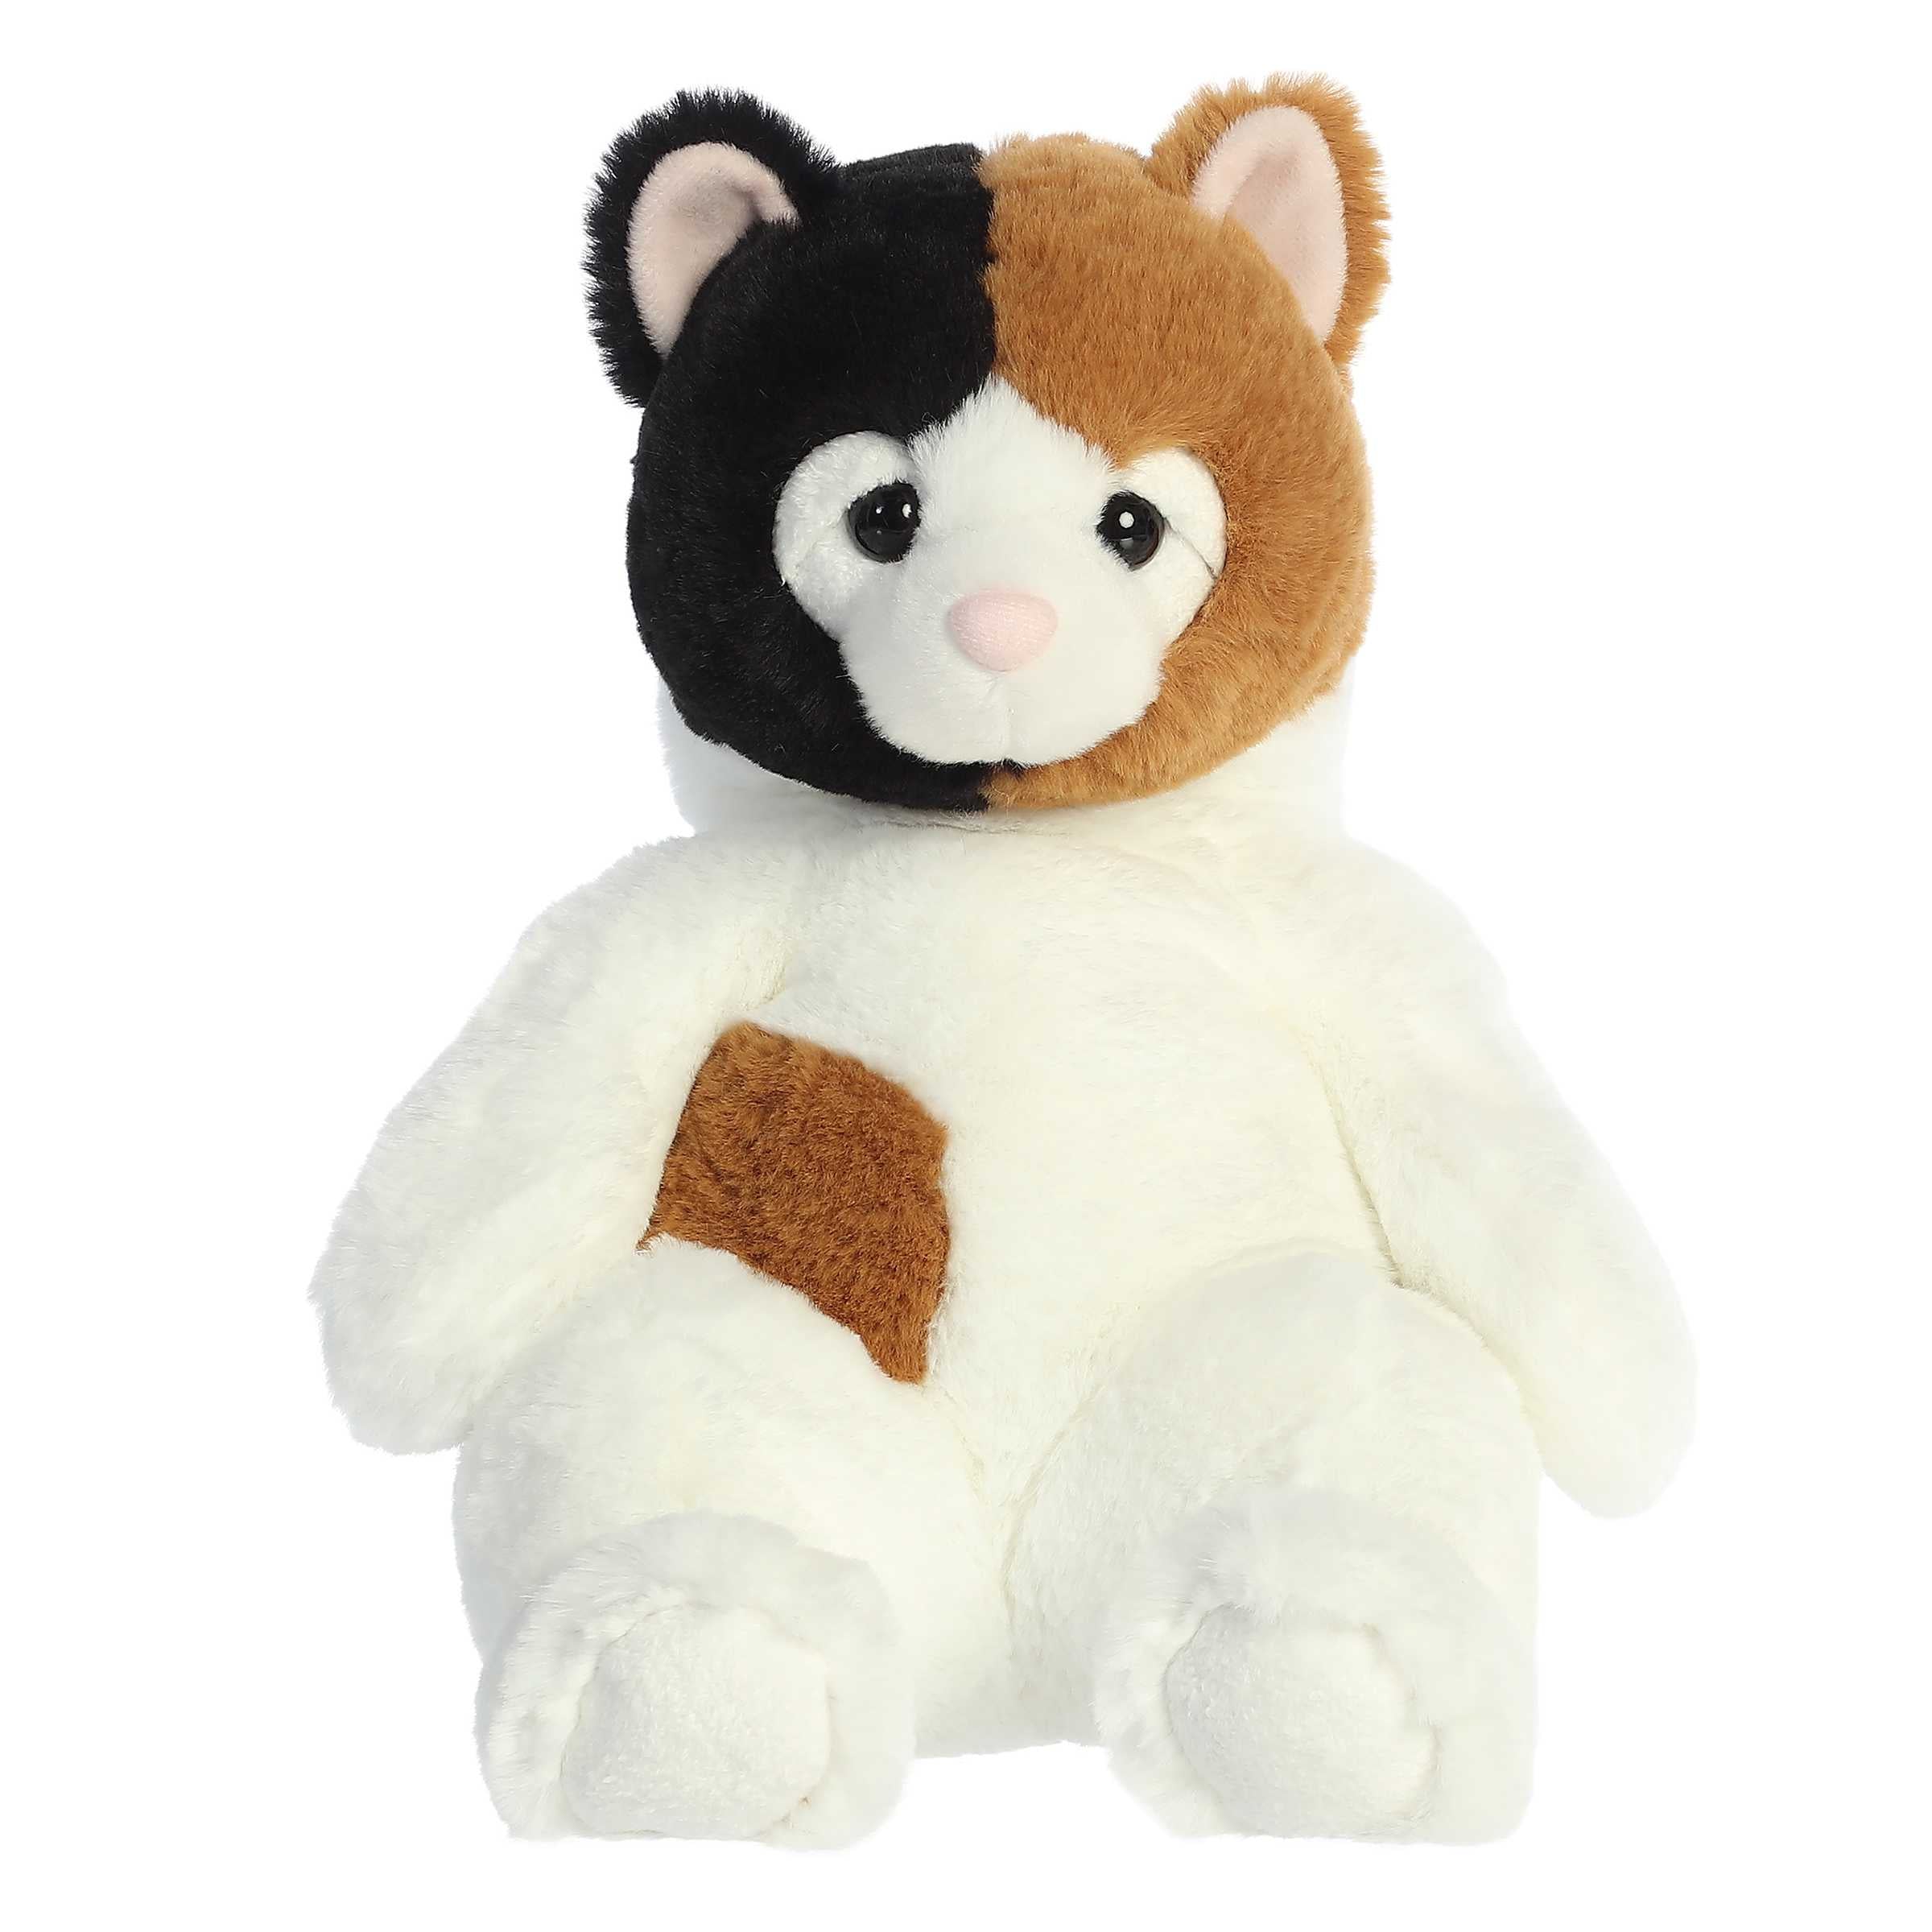 Tri-color calico cat plush with a relaxed posture and expressive face, crafted from ultra-soft materials for snuggles.